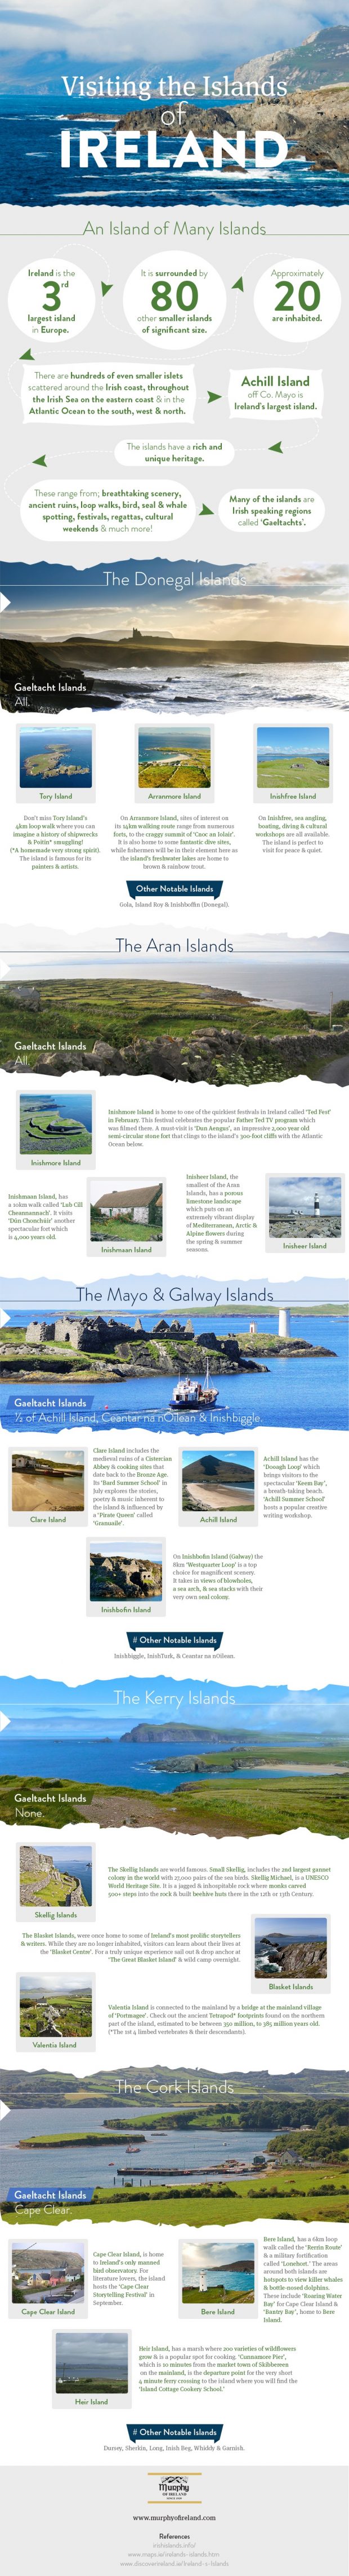 visiting-the-islands-of-ireland